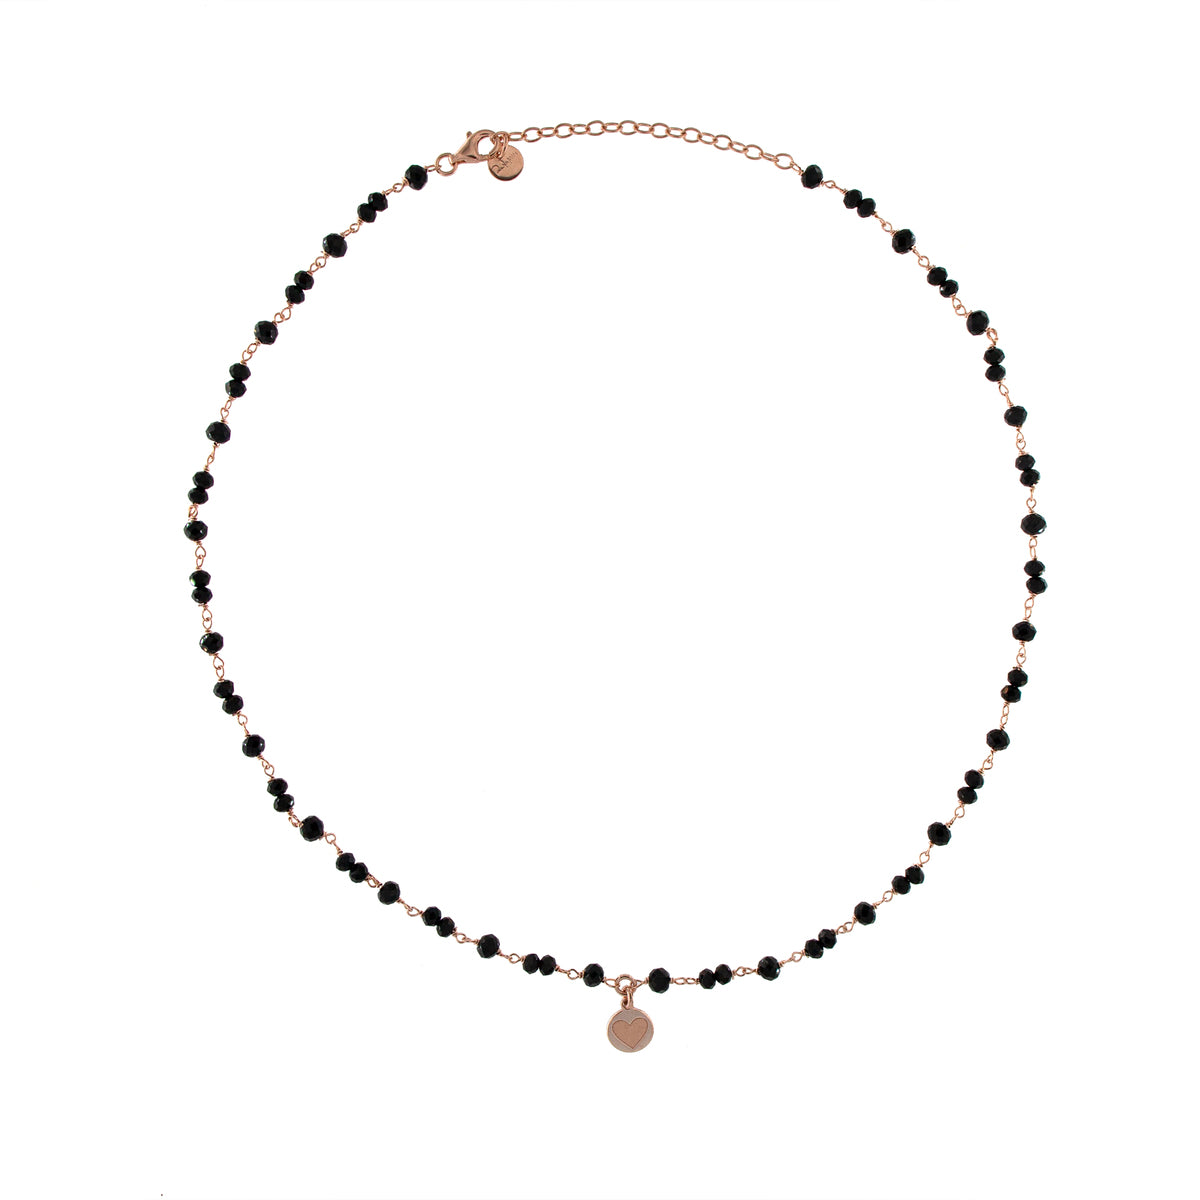 CHAINED STONES NECKLACE - GIPSY TIERRA BLACK